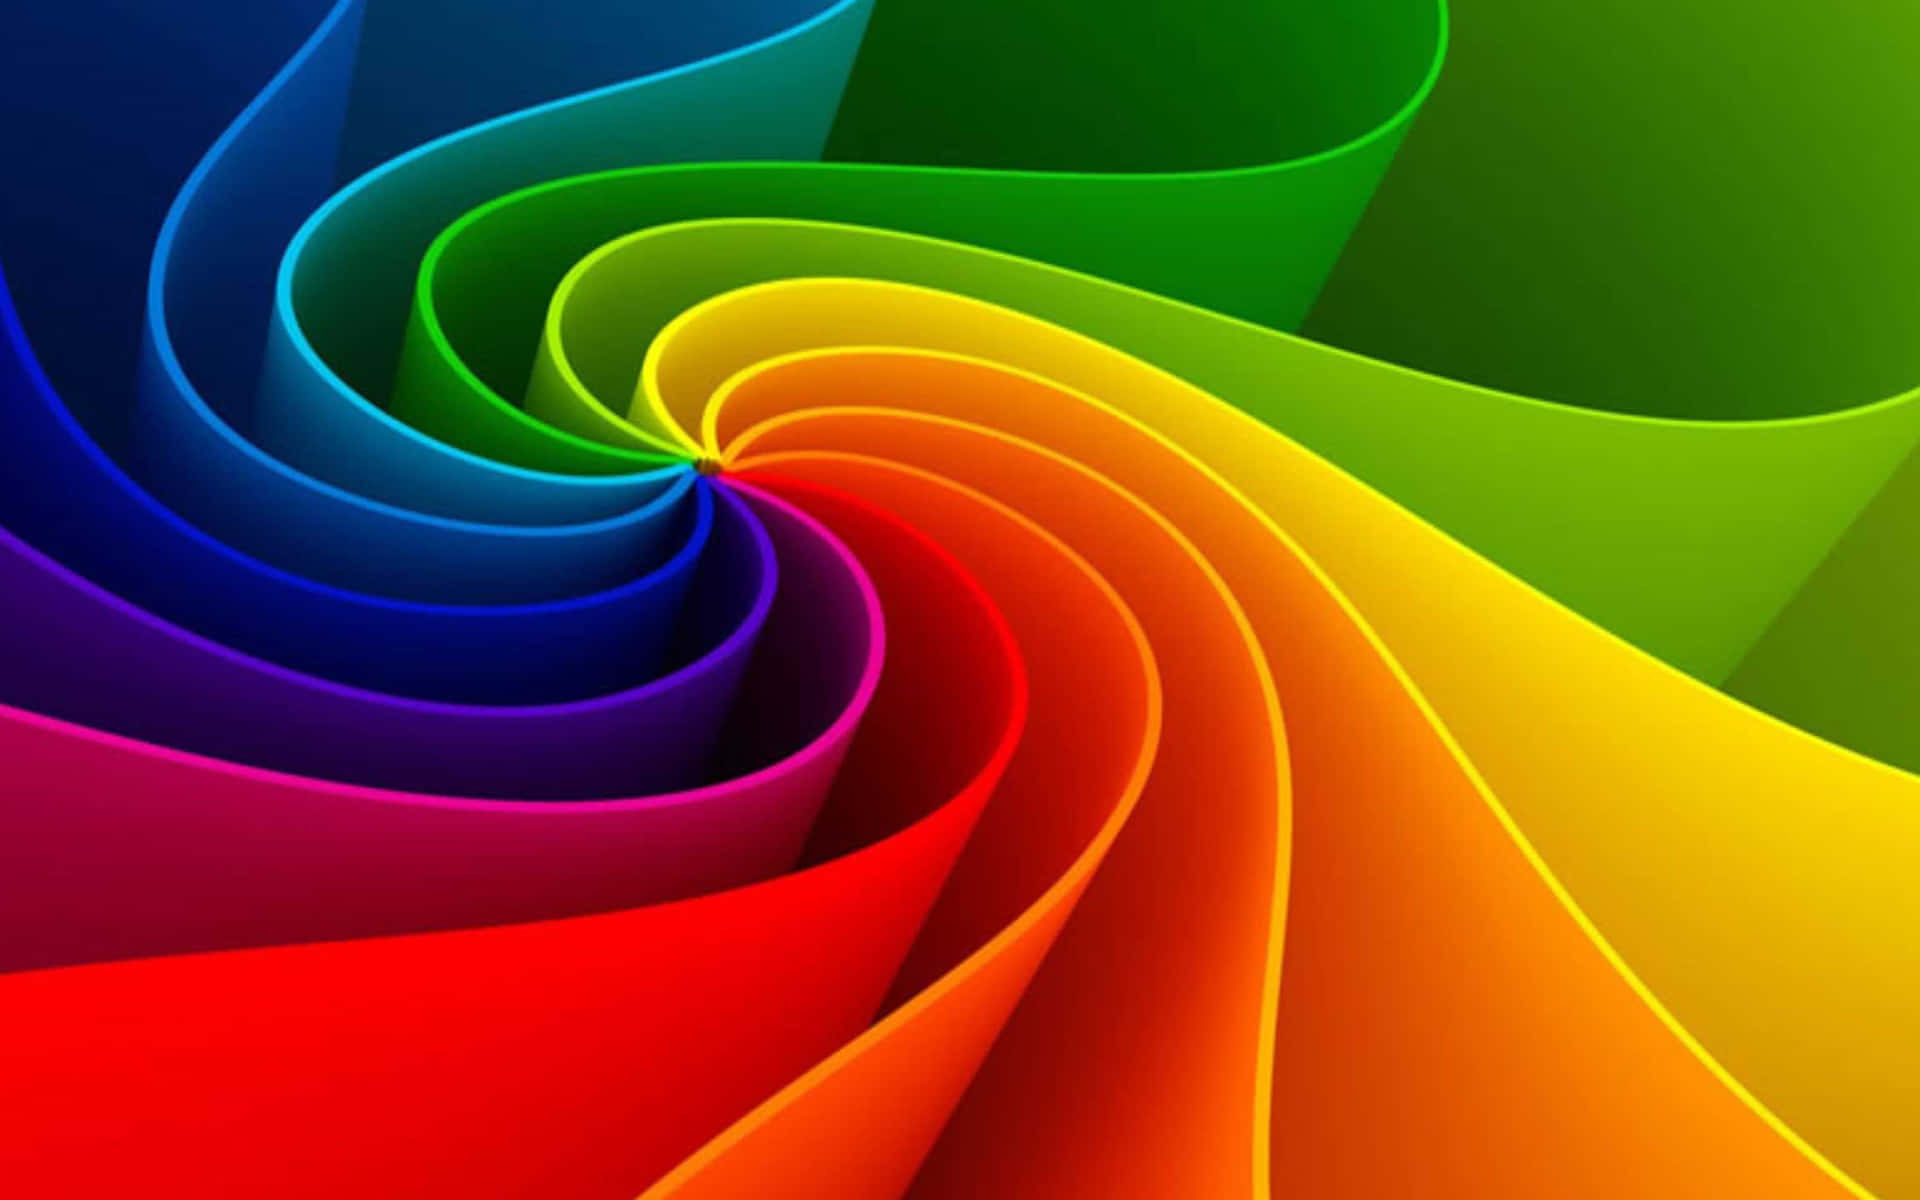 Several Colors Of The Rainbow Wallpaper